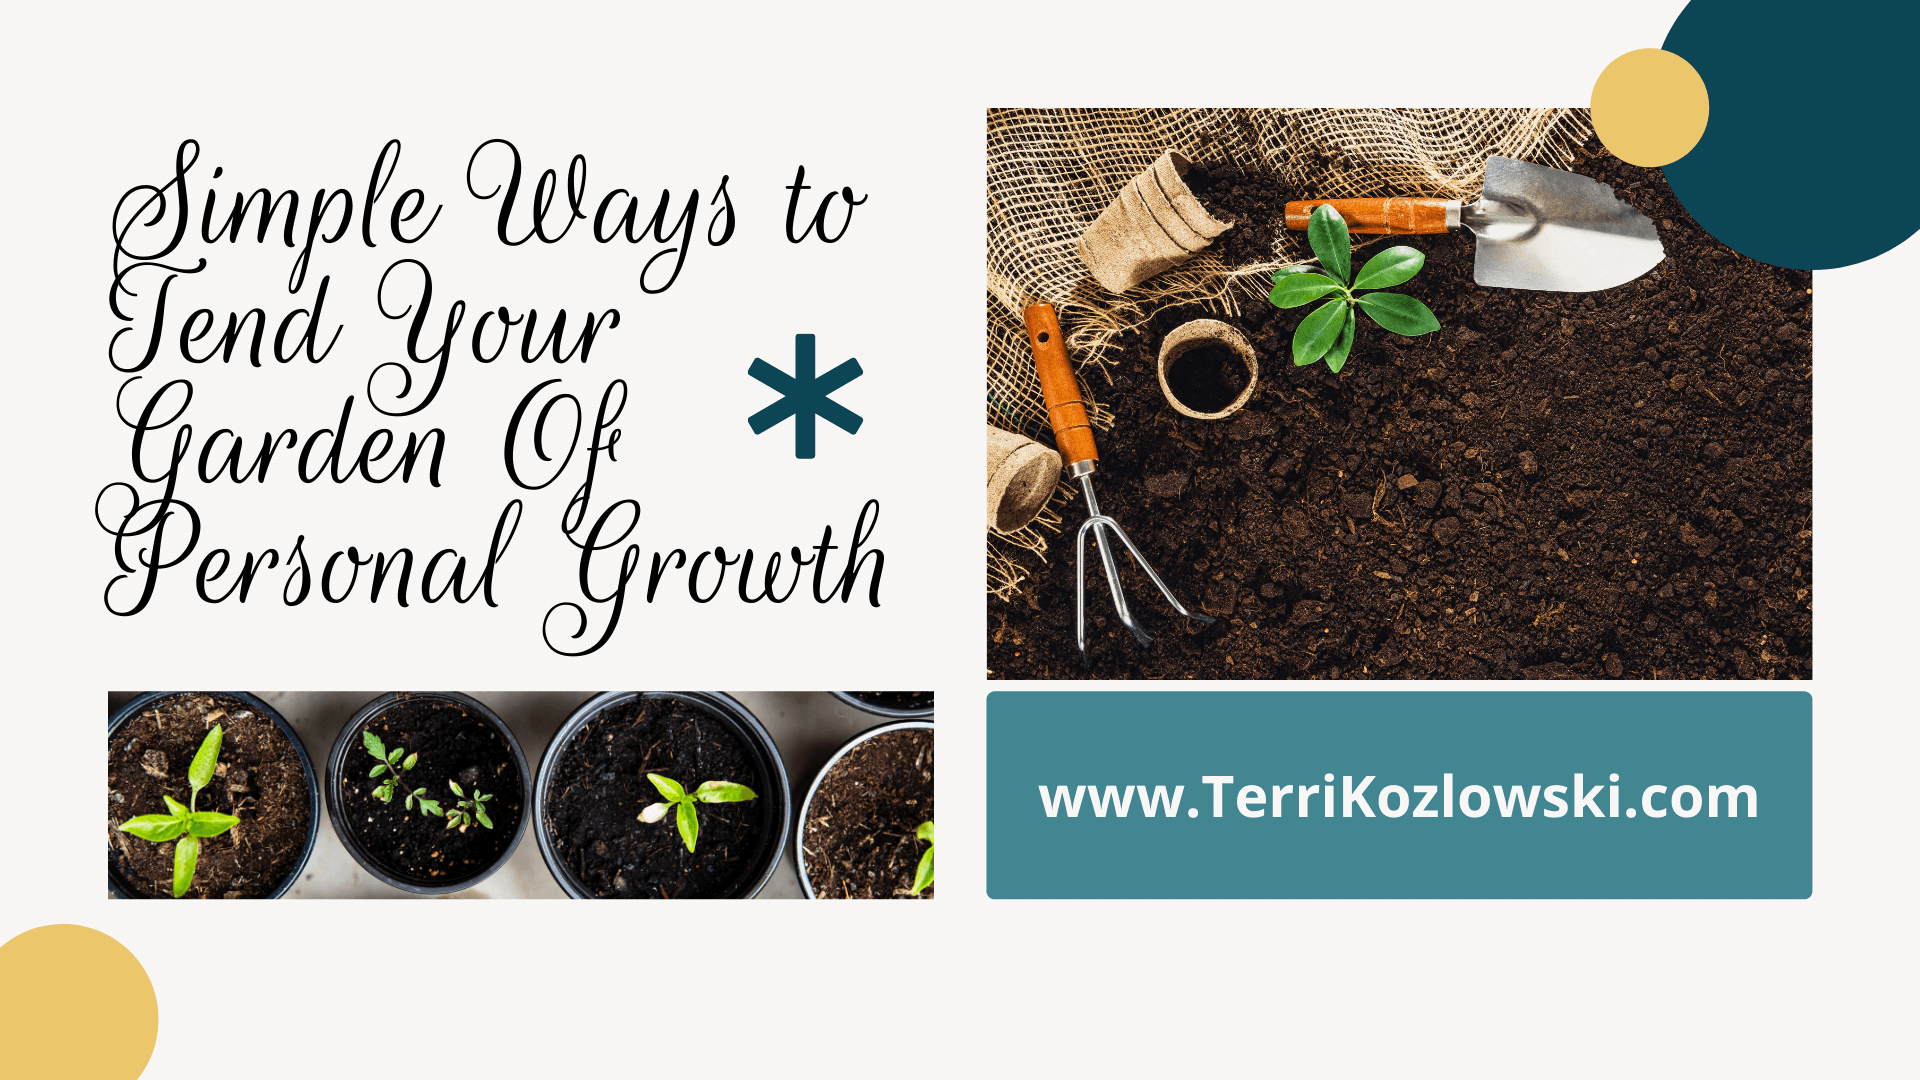 Simple Ways to Tend Your Garden of Personal Growth